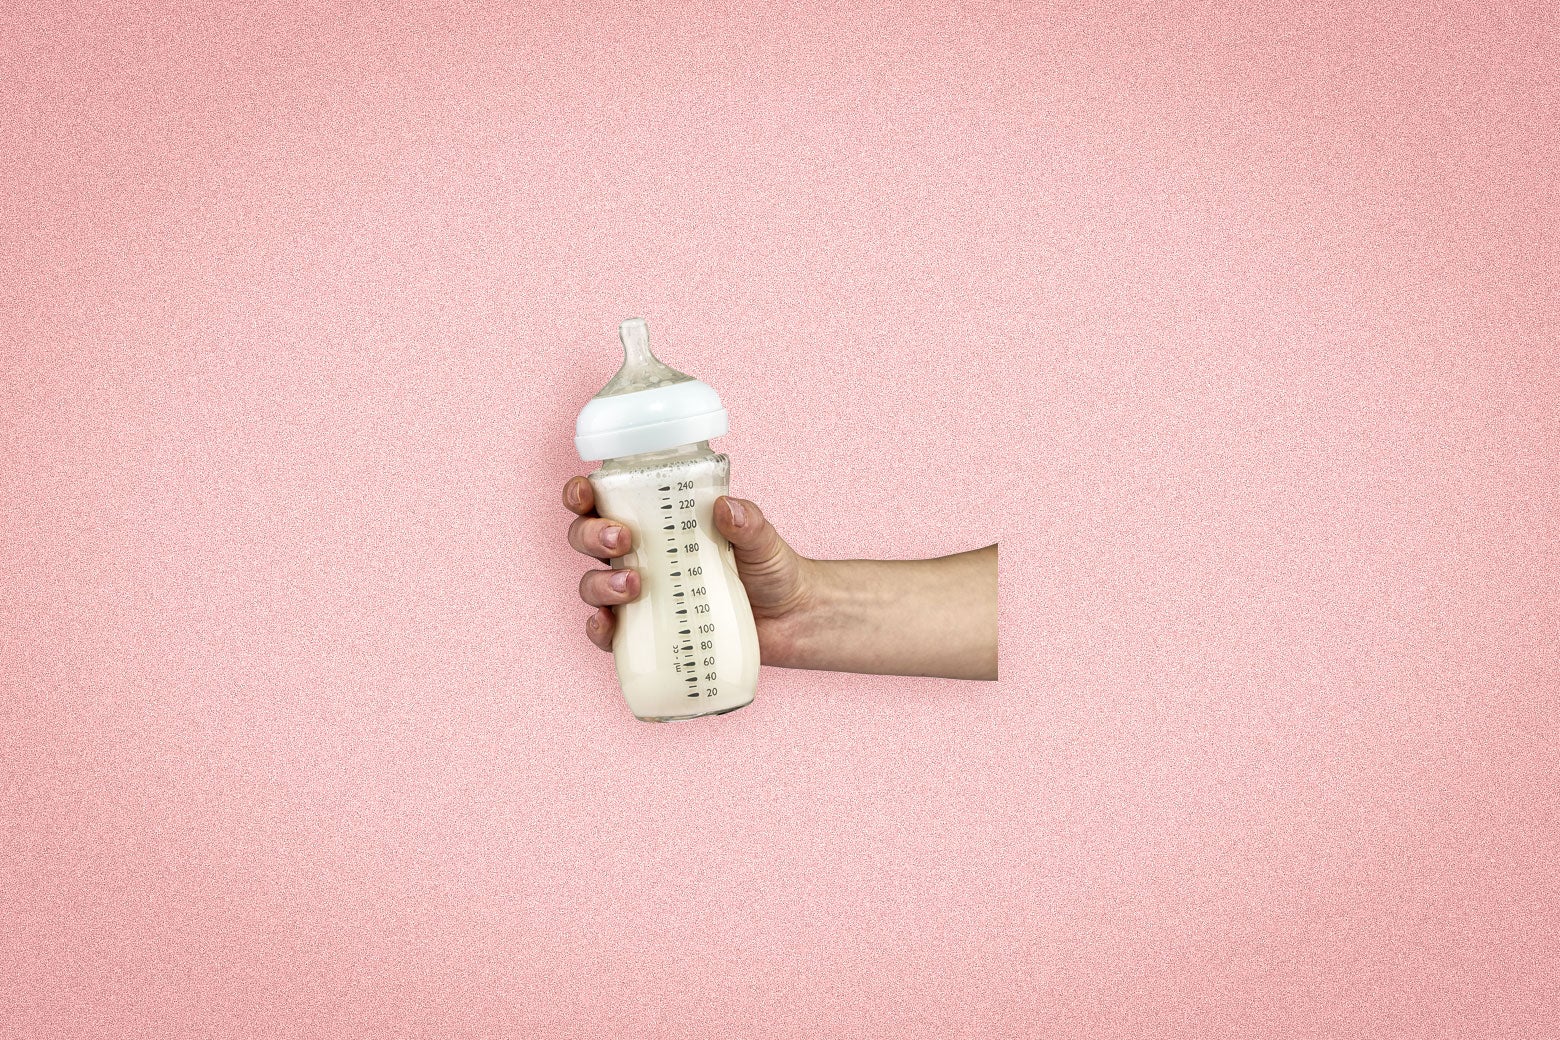 An outstretched hand holding a baby bottle filled with milk, set against a pink background.